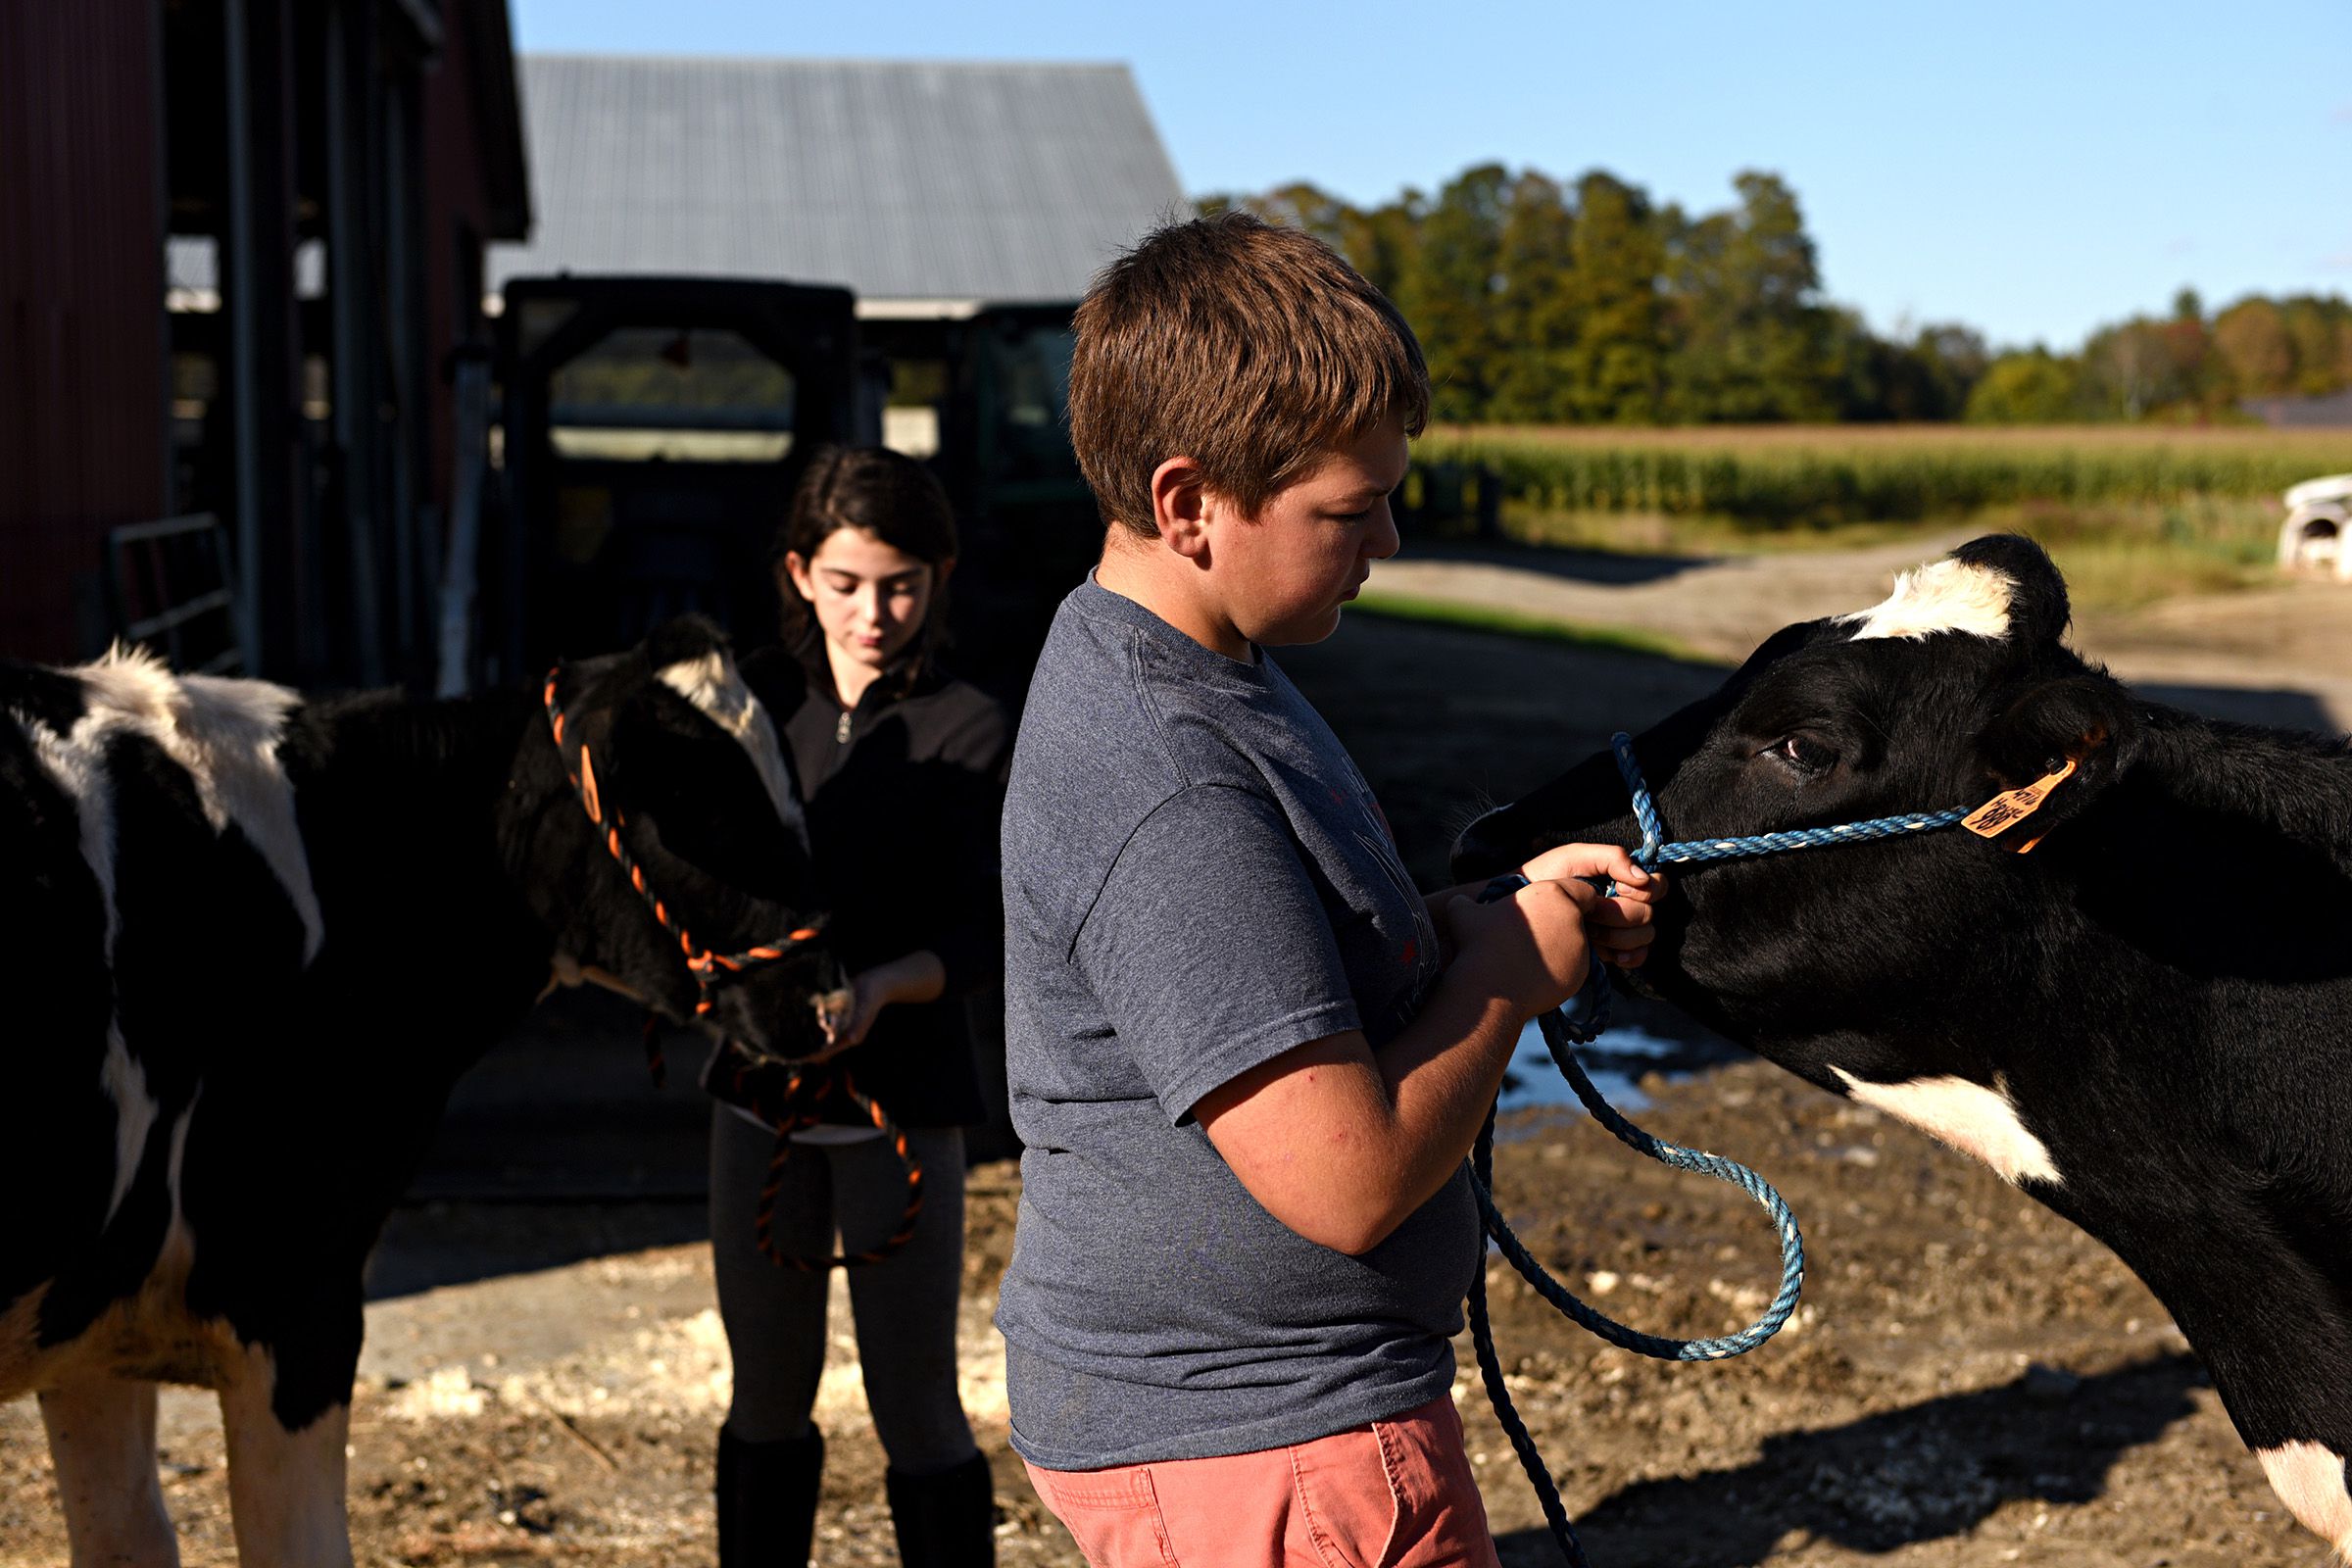 Angus Spence, right, leads his calf Edna at Tullando Farm in Orford , N.H., on Friday, Sept. 27, 2019. Spence along with Ava Rayes, 11, left, holding her calf Fancy, both of Lyme, N.H., are 4-H members. They lease calves from the farm to work with and show at local fairs. (Valley News - Jennifer Hauck) Copyright Valley News. May not be reprinted or used online without permission. Send requests to permission@vnews.com.